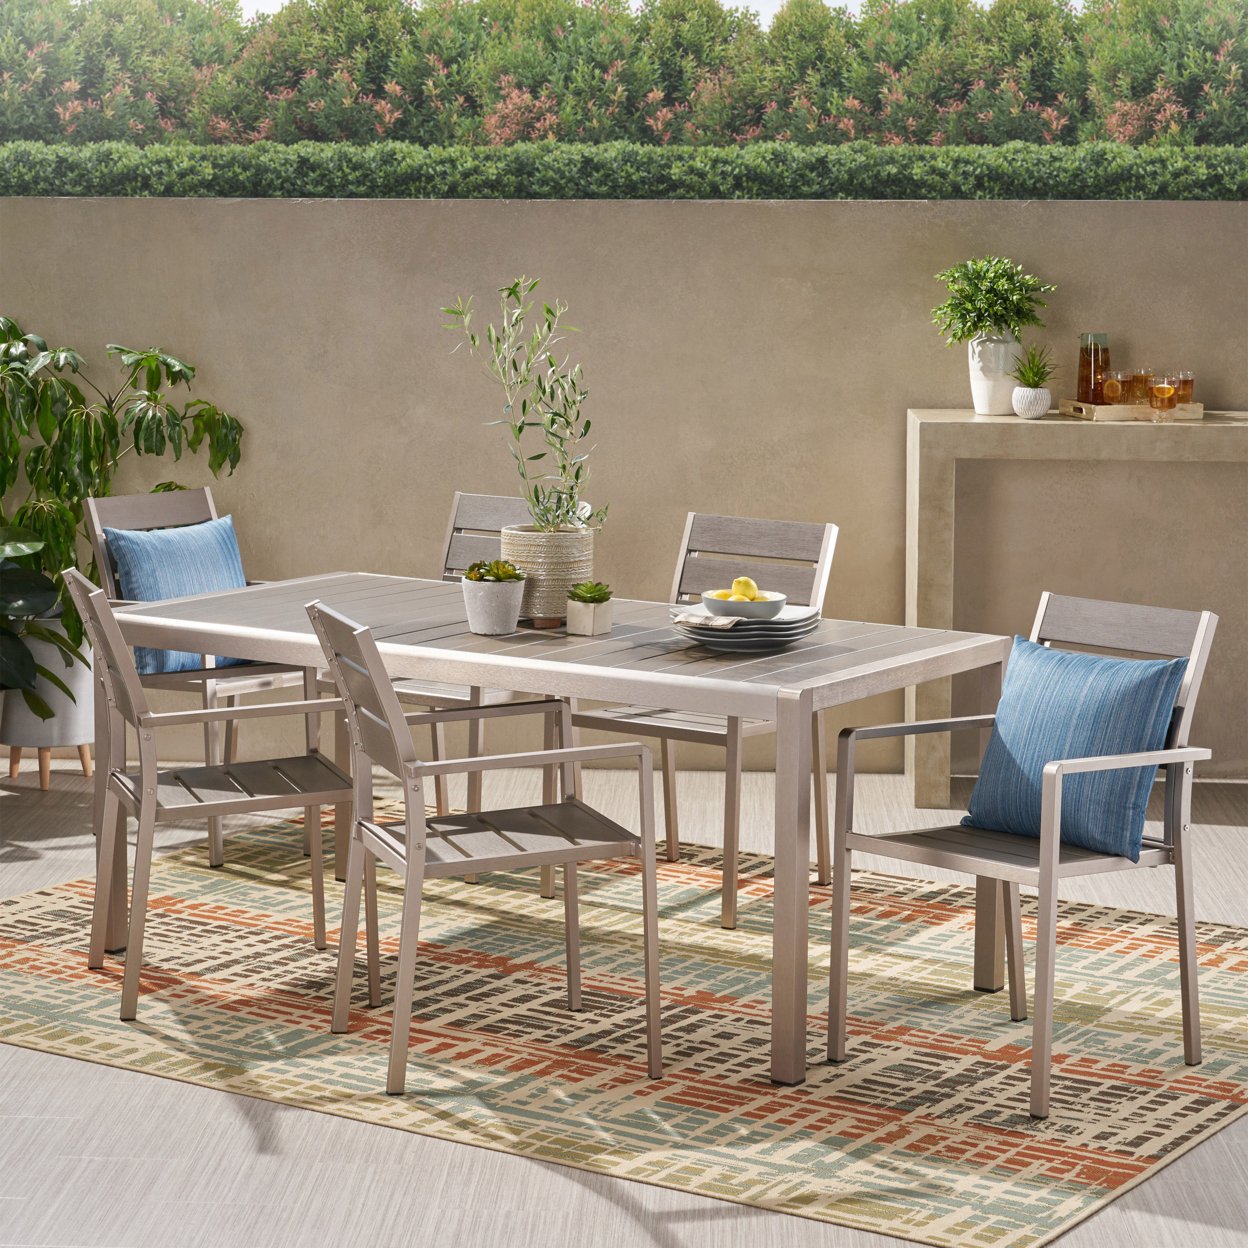 Martina Outdoor Modern Aluminum And Faux Wood 6 Seater Dining Set - Gray + Silver